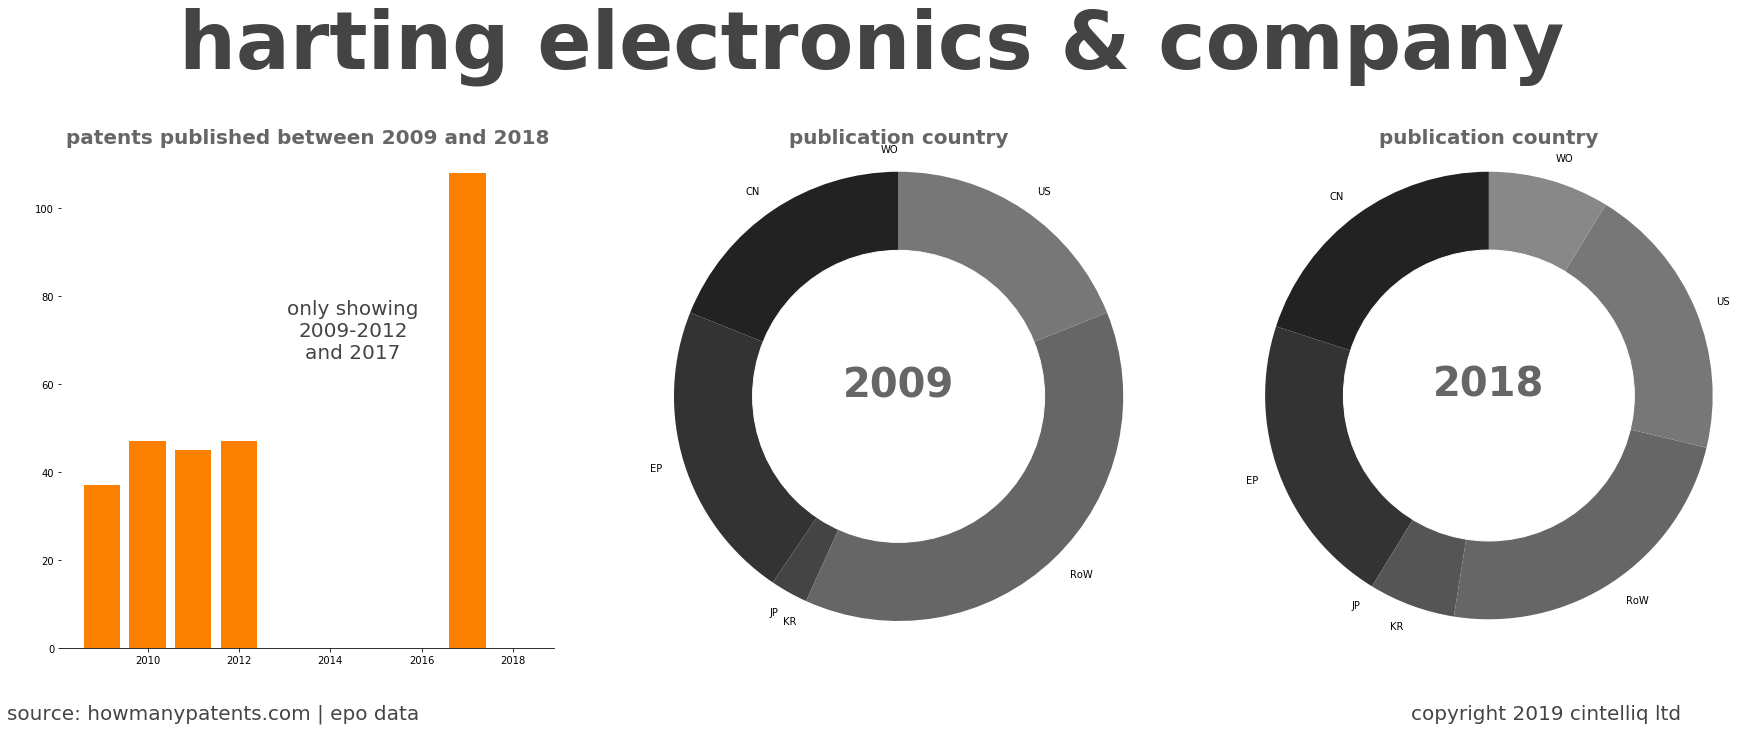 summary of patents for Harting Electronics & Company